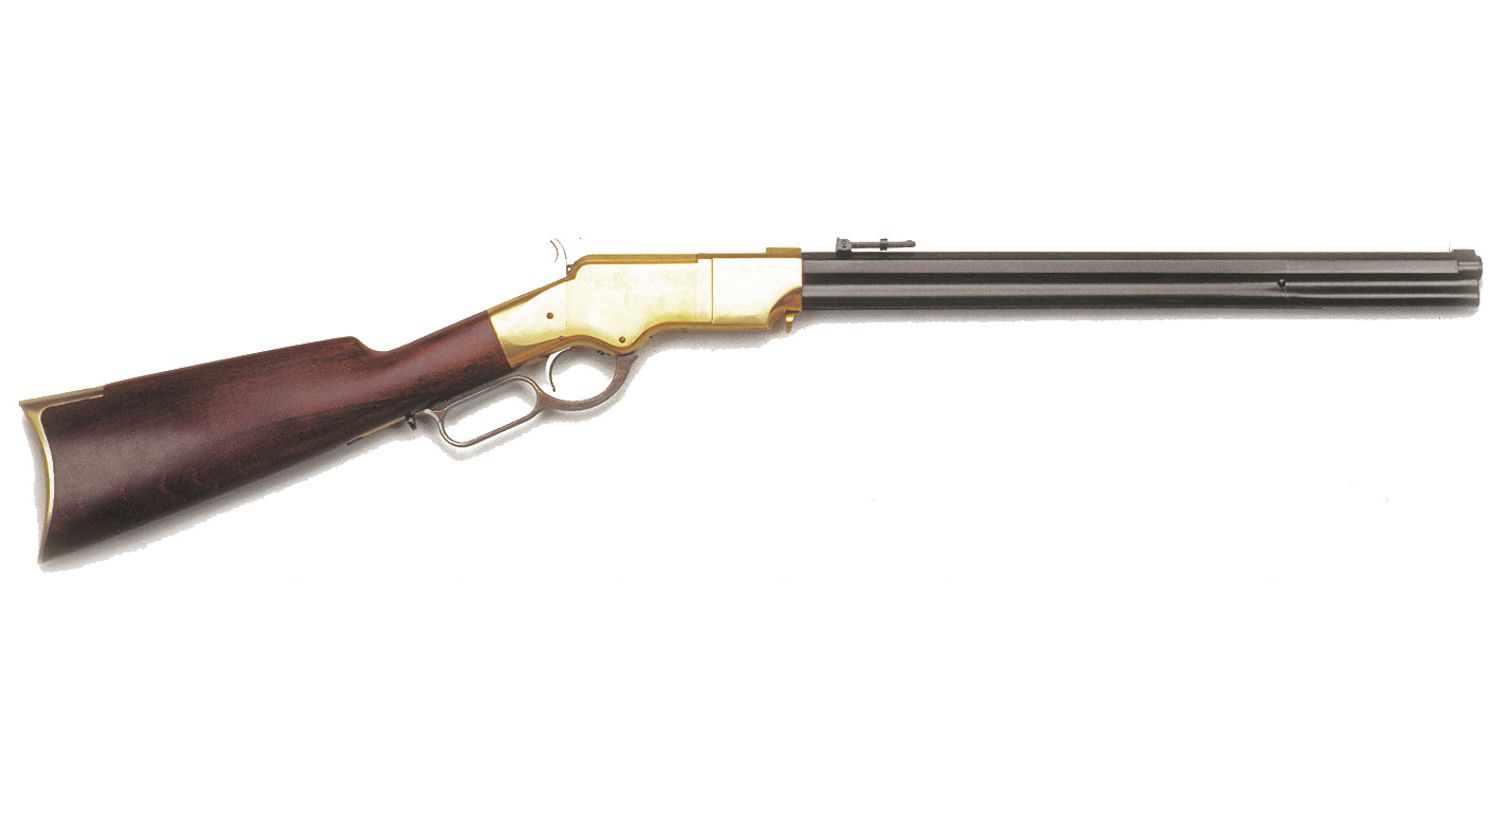 View 1860 Henry Transition Rifle Gif